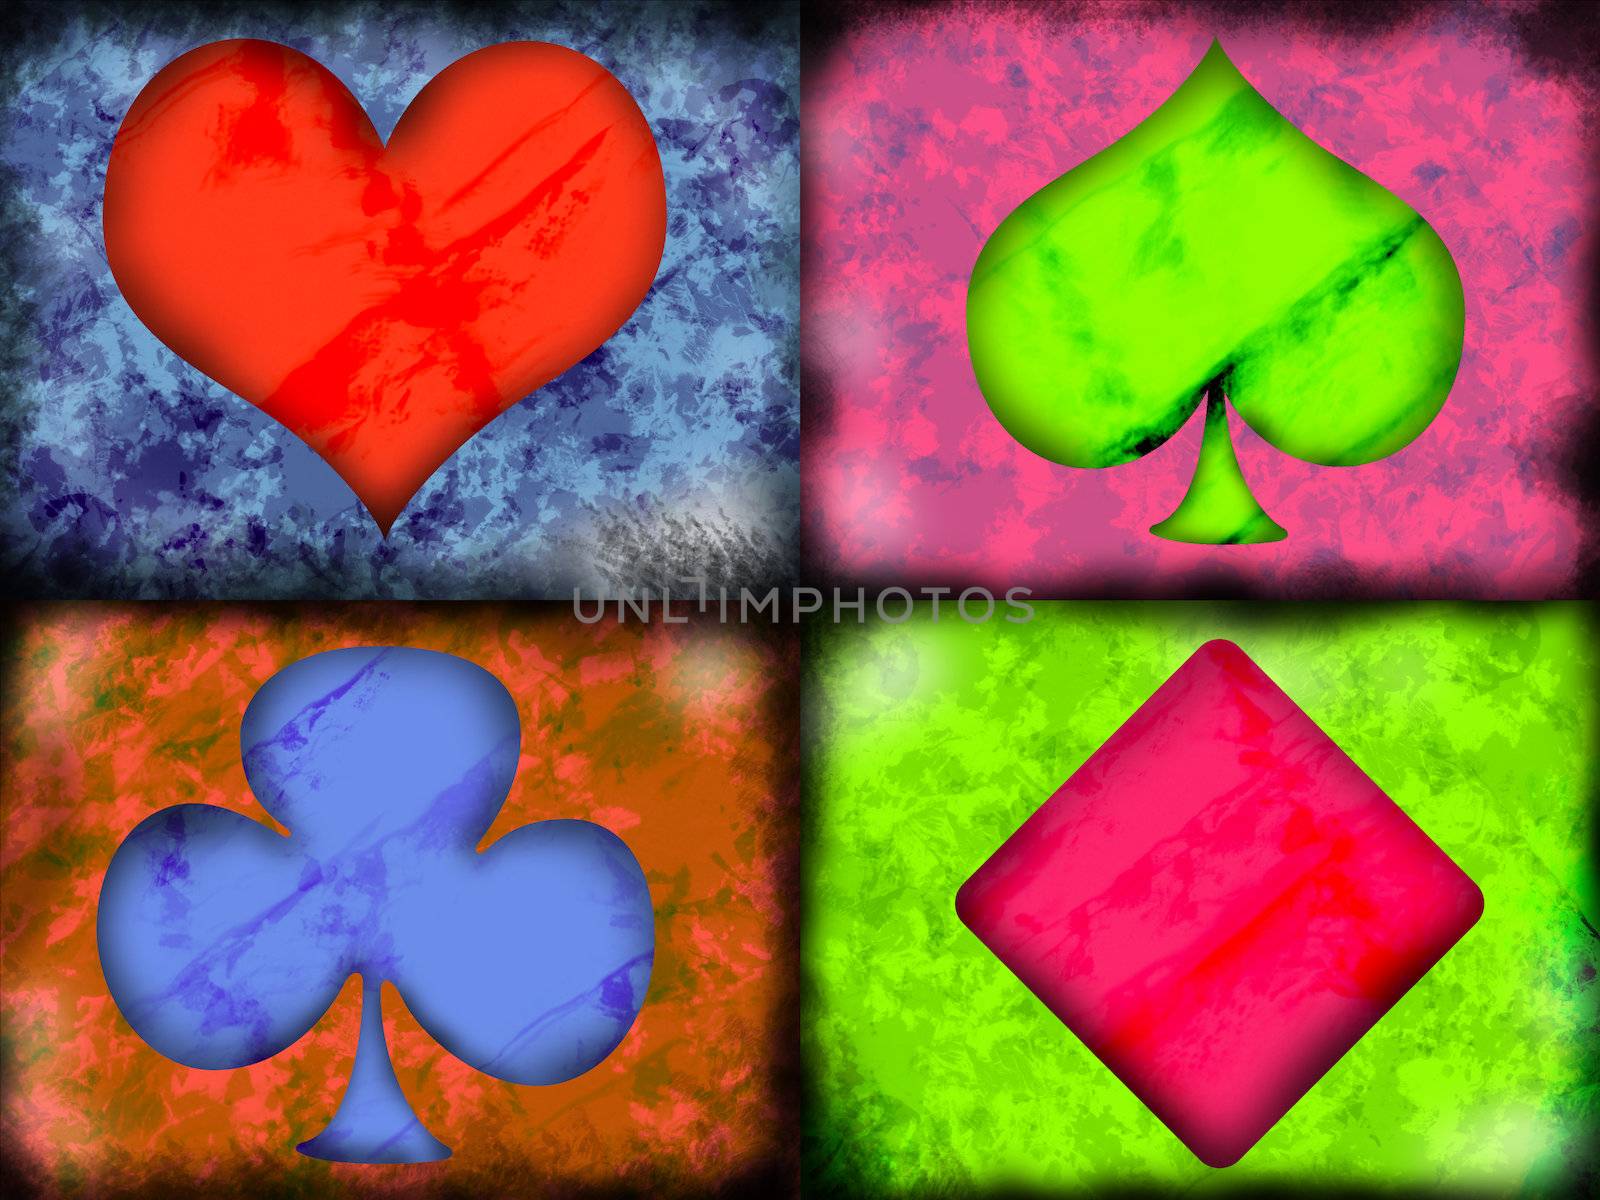 Depiction of the four suits of playing cards in a grunge style